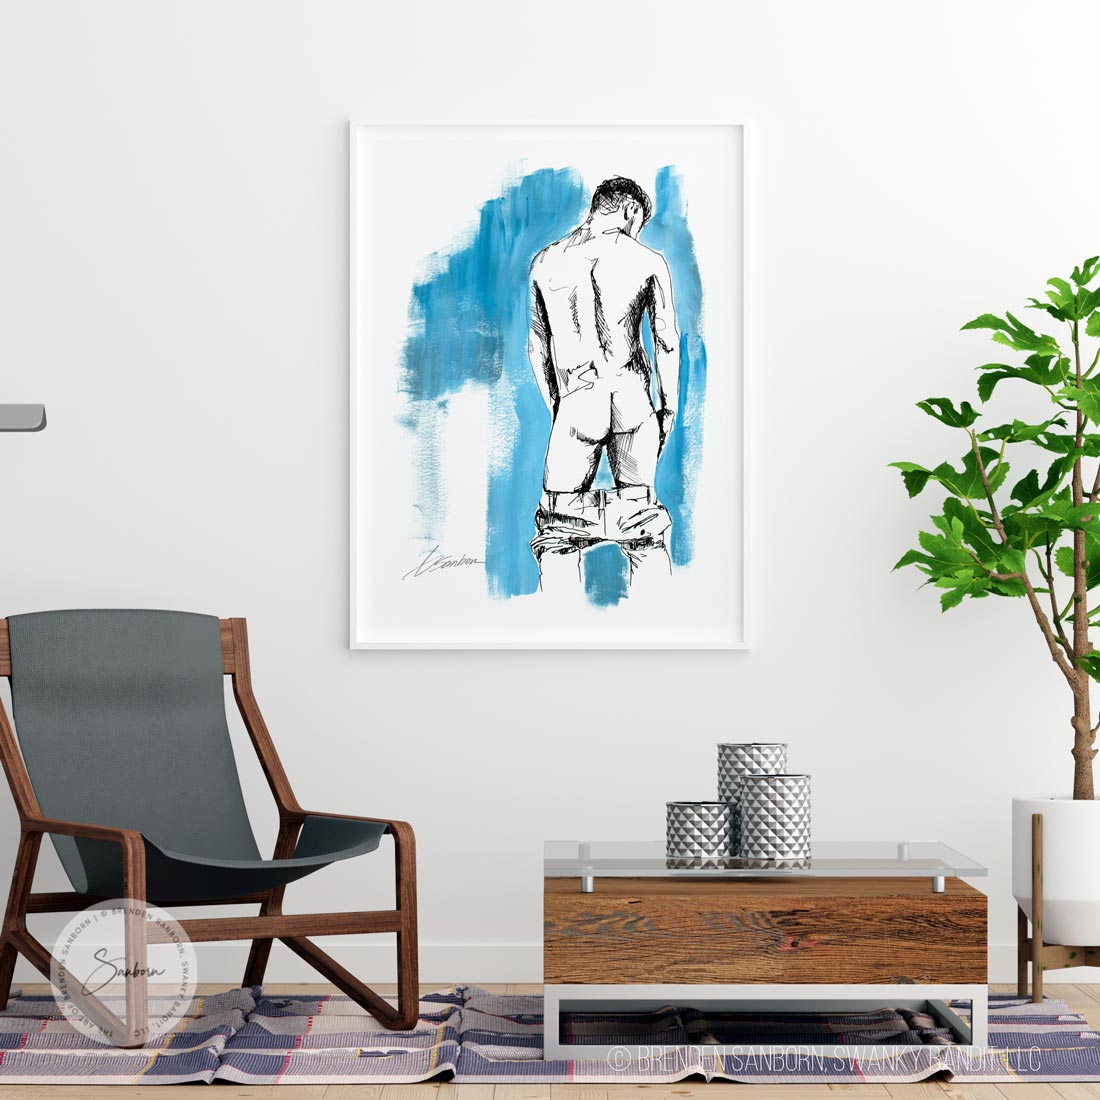 Daring Descent: Young Man with Muscular Arms, Pants Lowered - Giclee Art Print